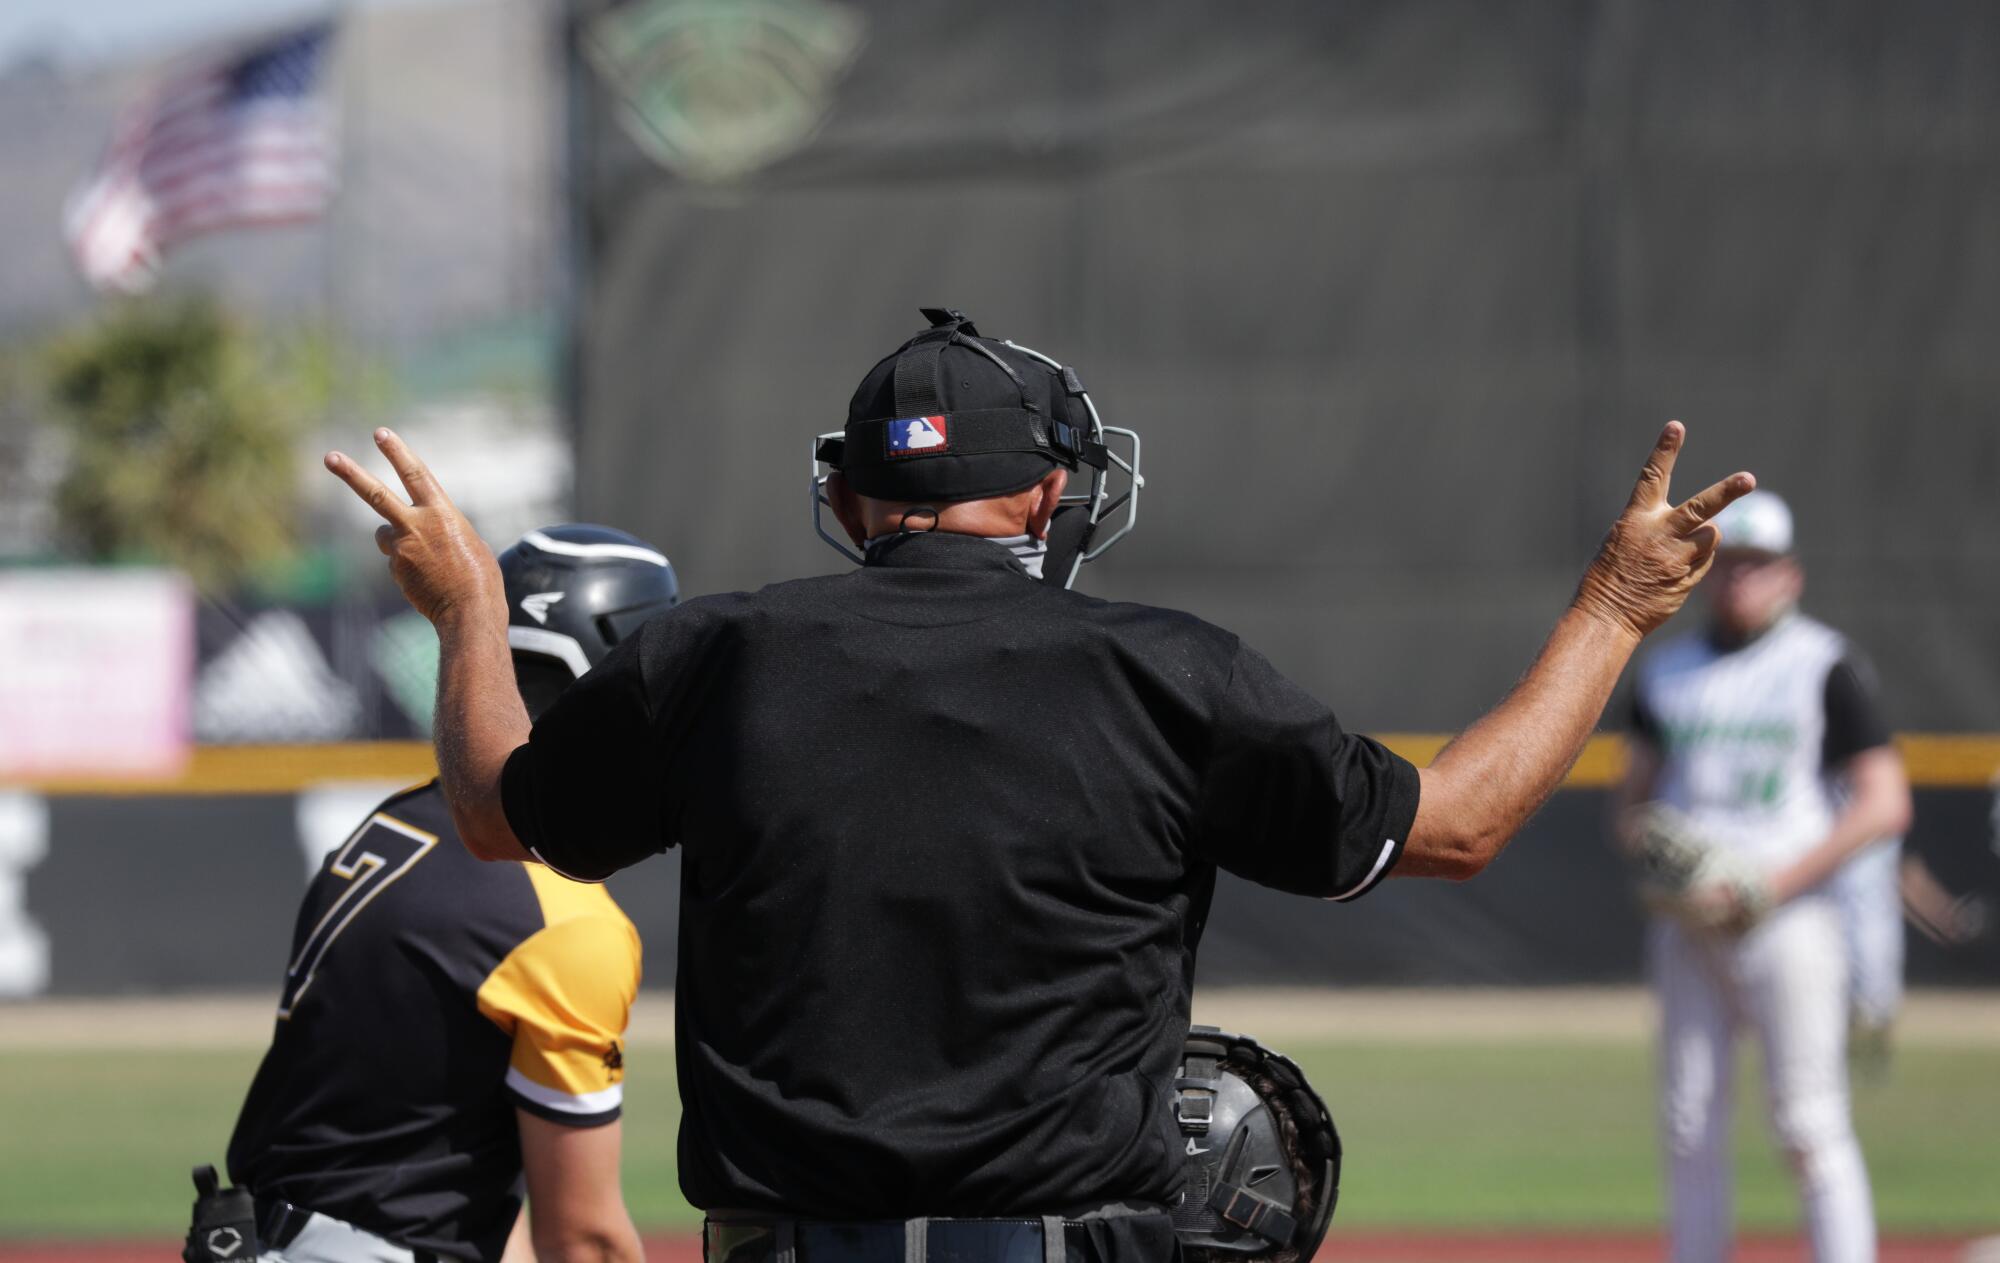 Plate umpire Jeff Sill shows a 2-2 count during an at-bat.